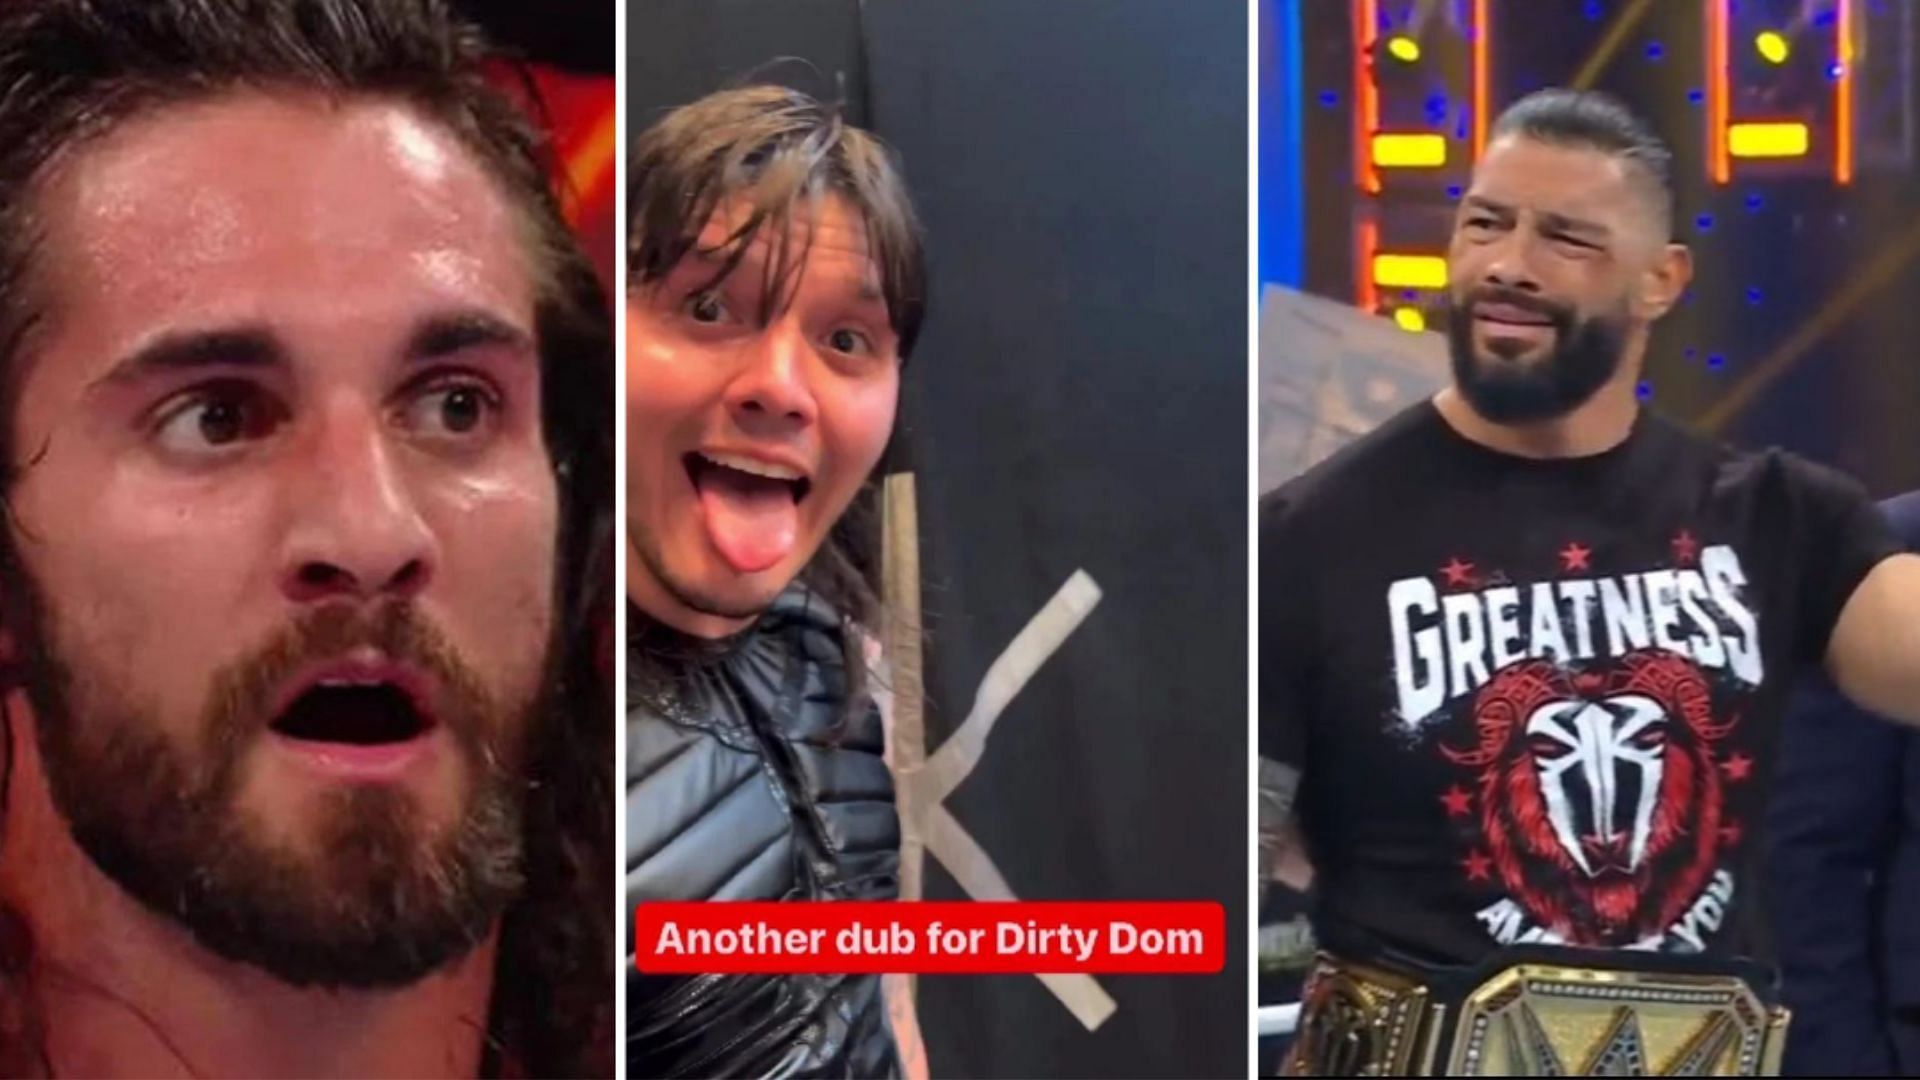 Seth Rollins on the left, Dominik Mysterio in the middle, Roman Reigns on the right